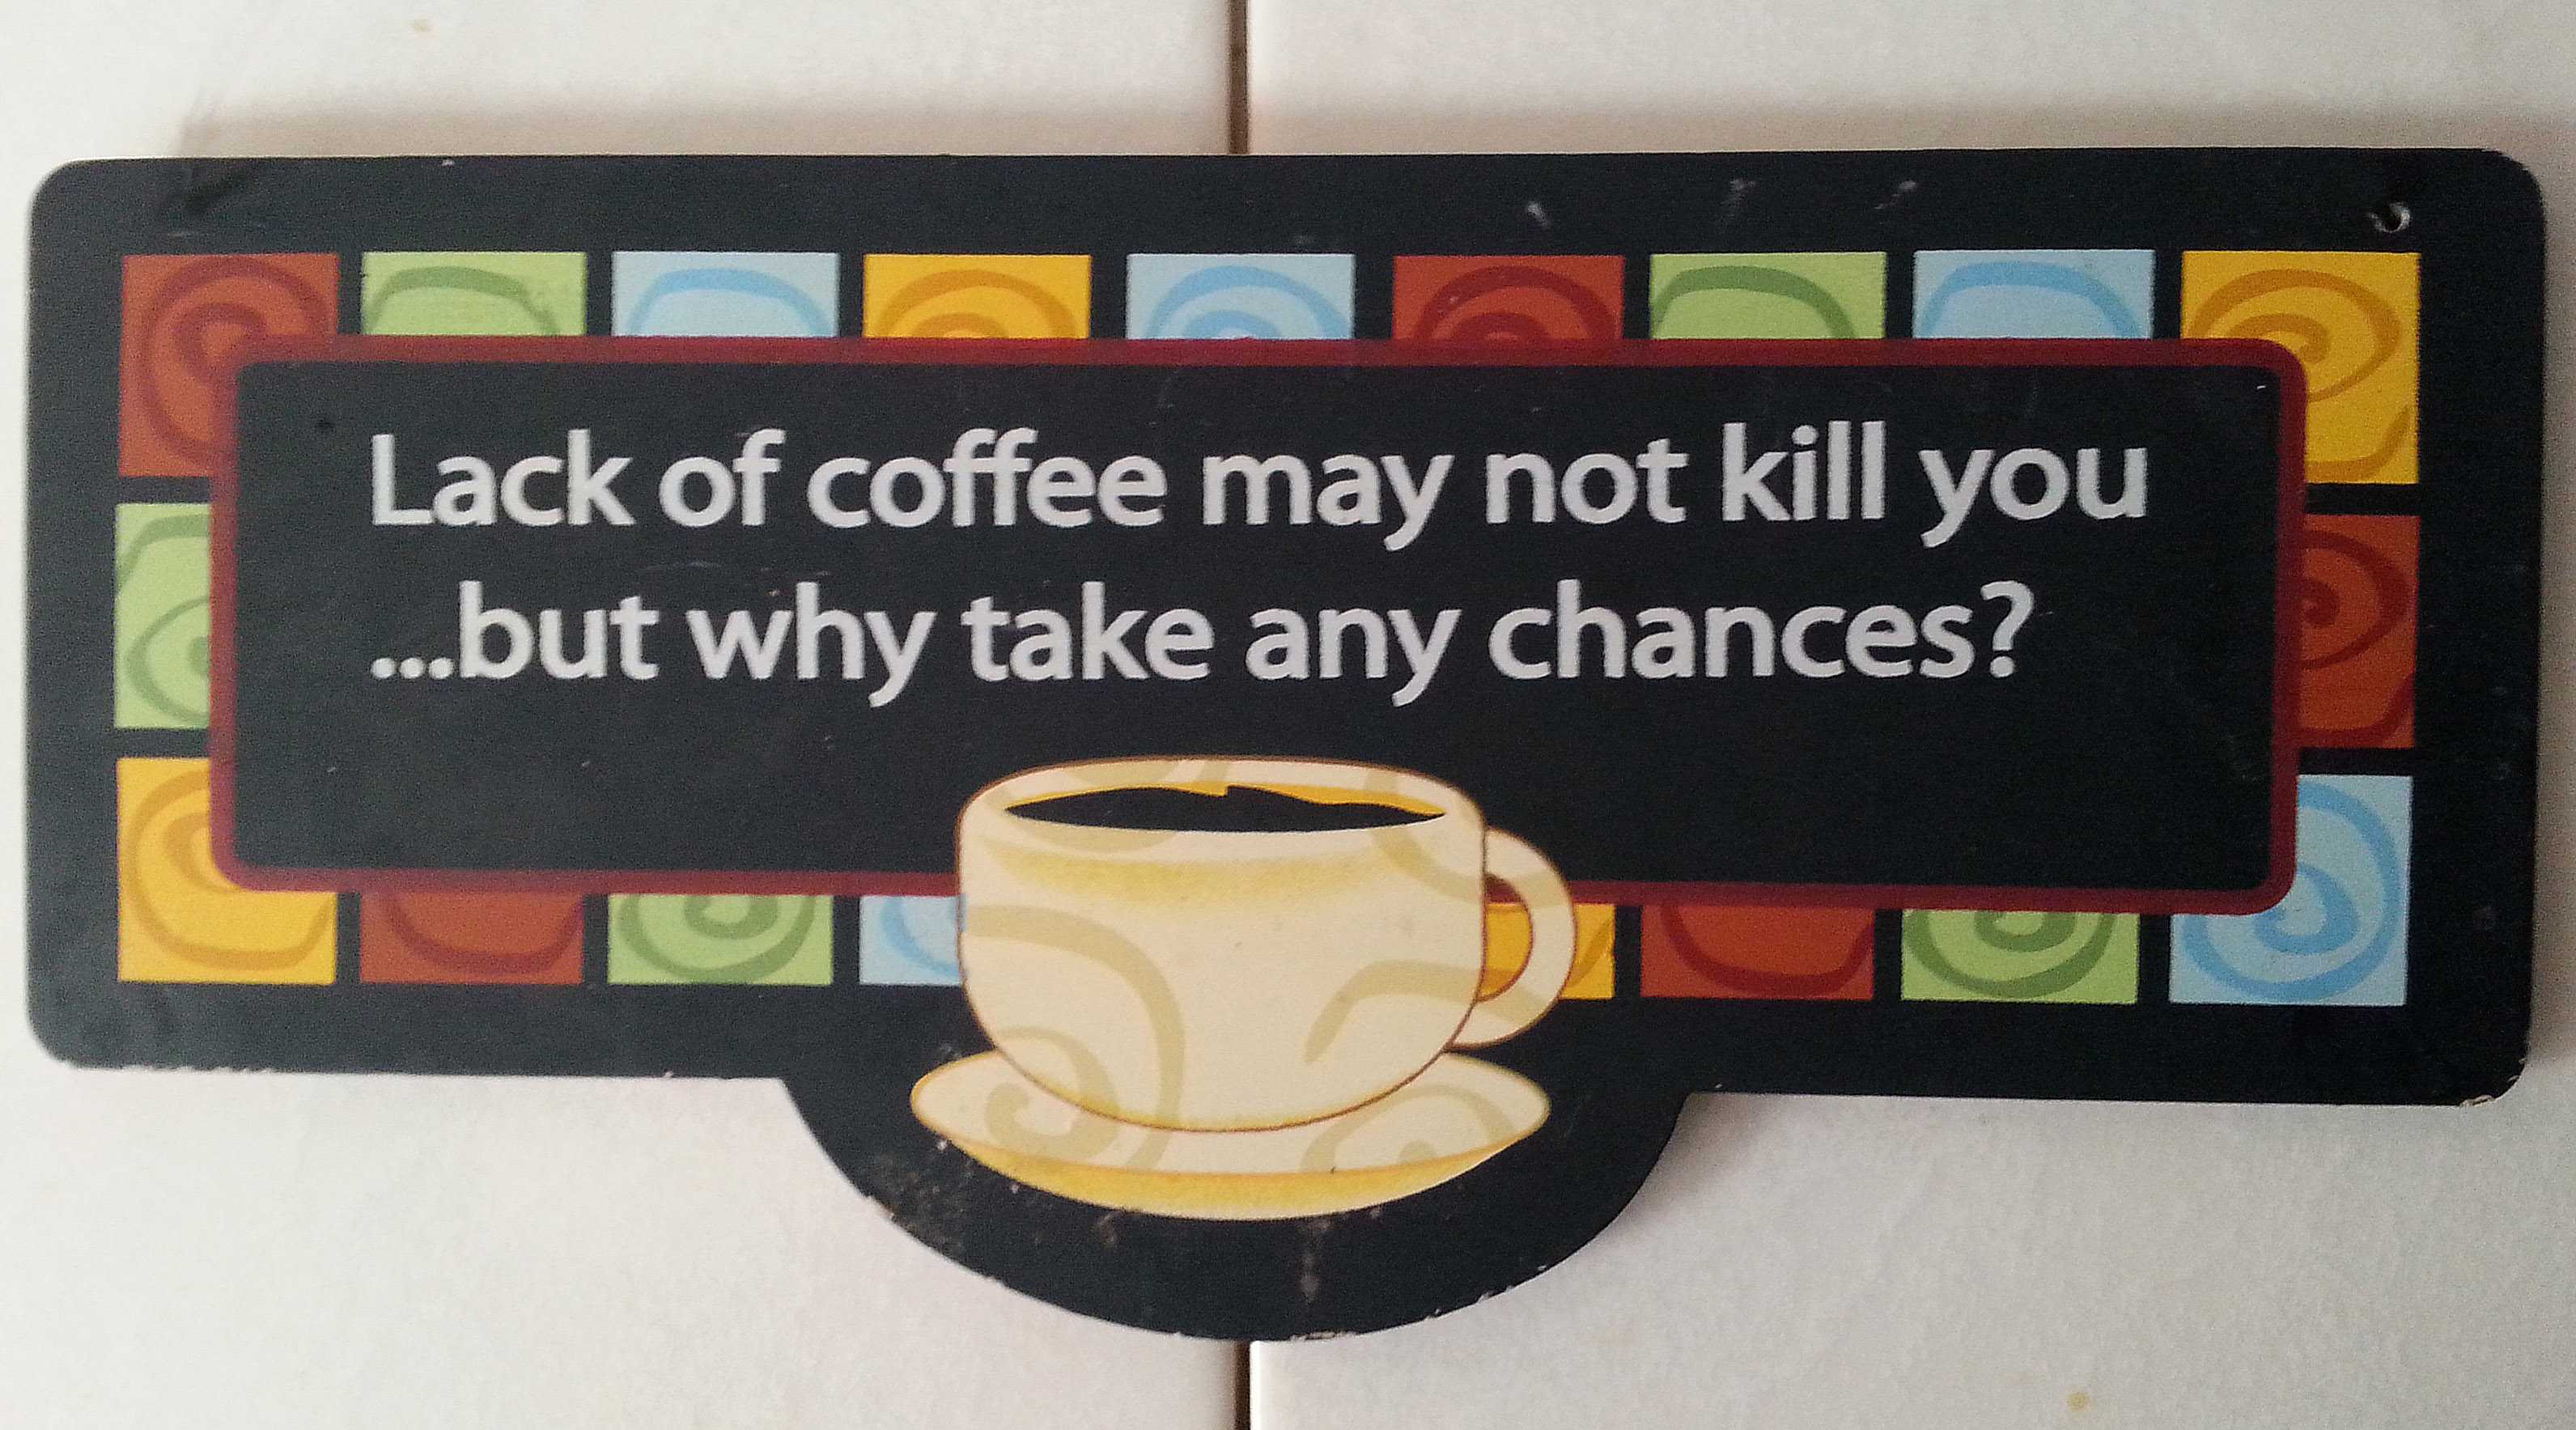 Lack of coffee may not kill you, but why take any chances?